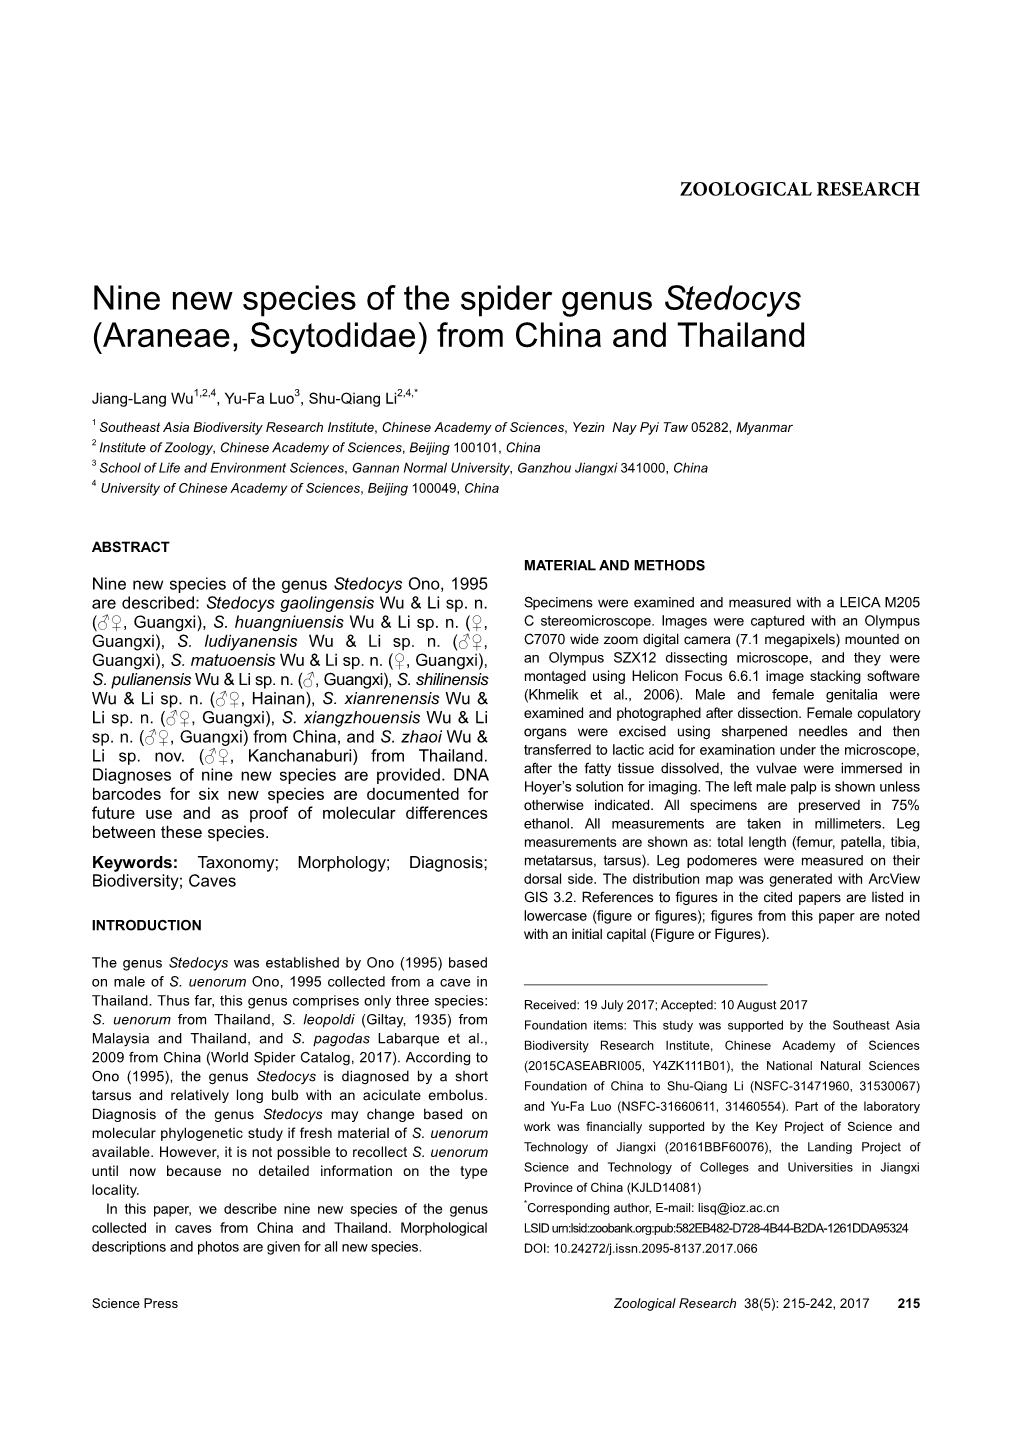 Nine New Species of the Spider Genus Stedocys (Araneae, Scytodidae) from China and Thailand